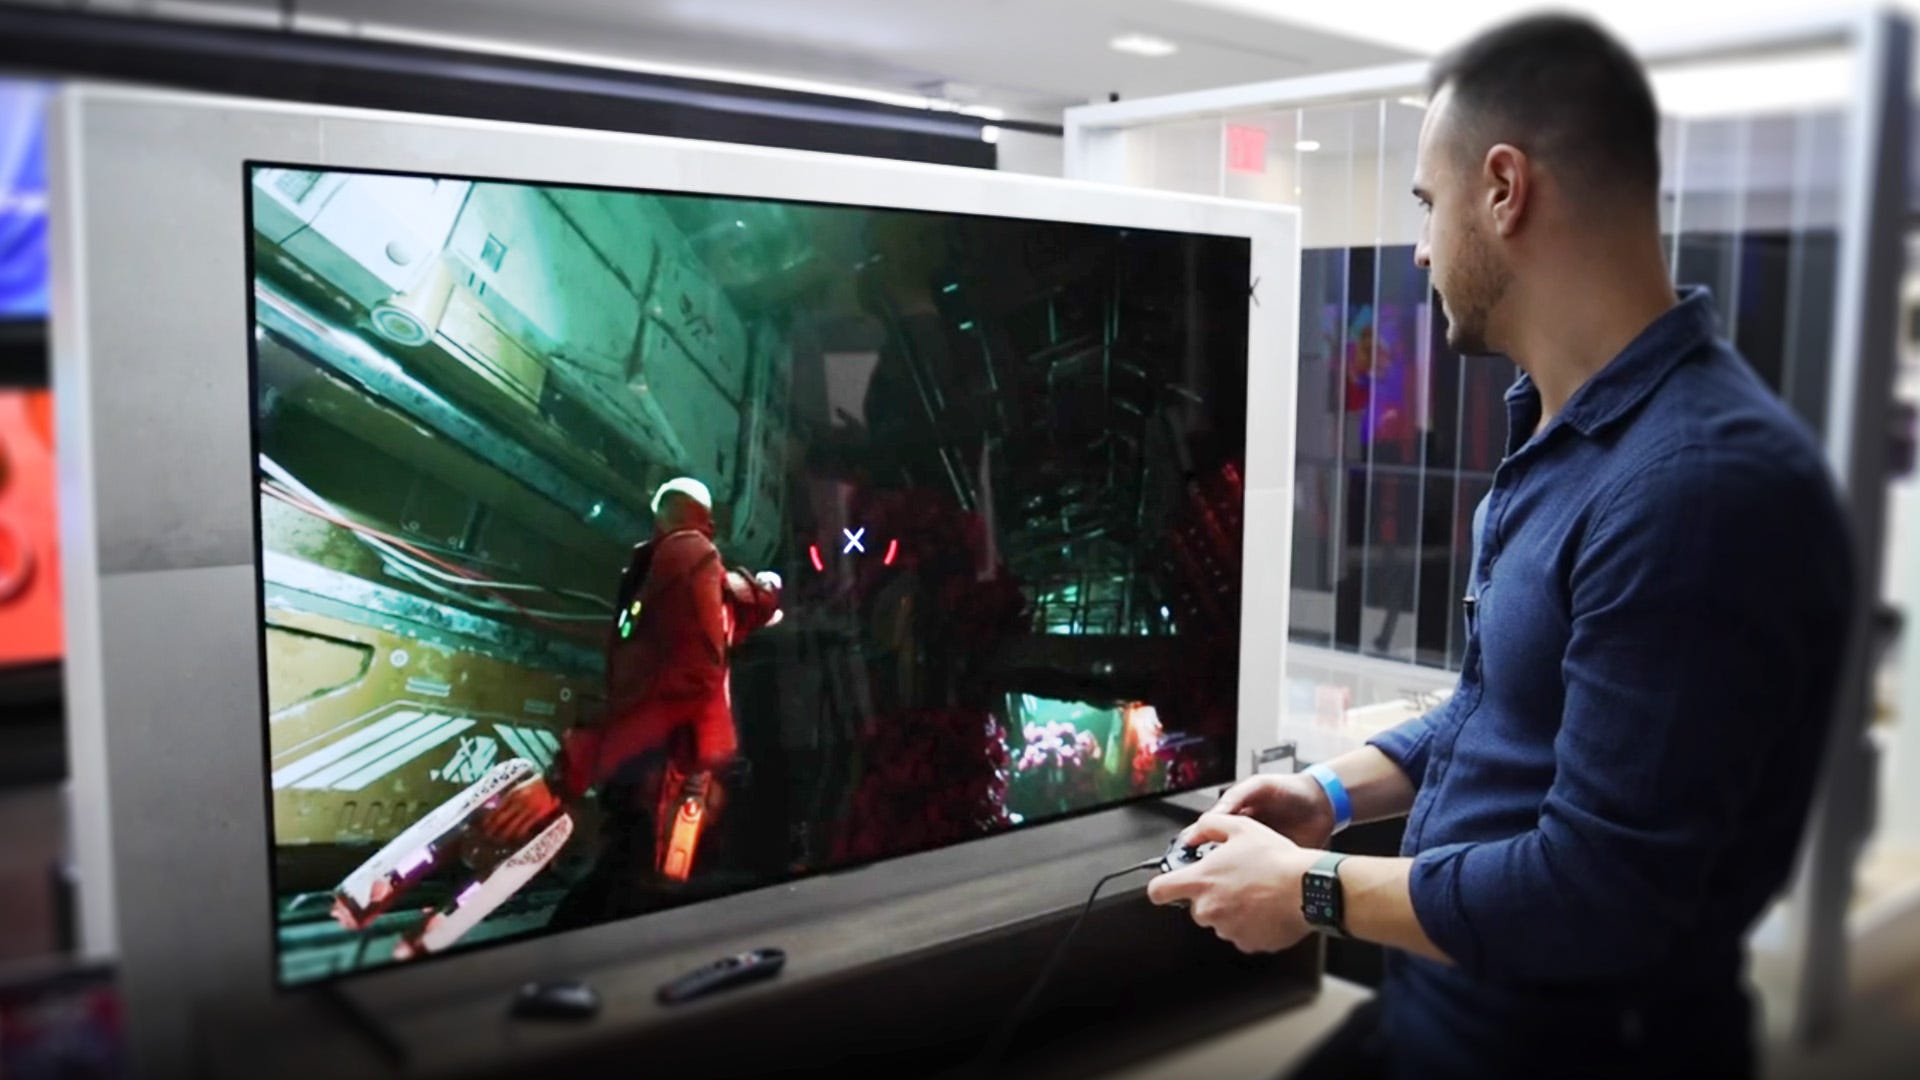 LG's new 42-inch OLED gaming TV - Video - CNET